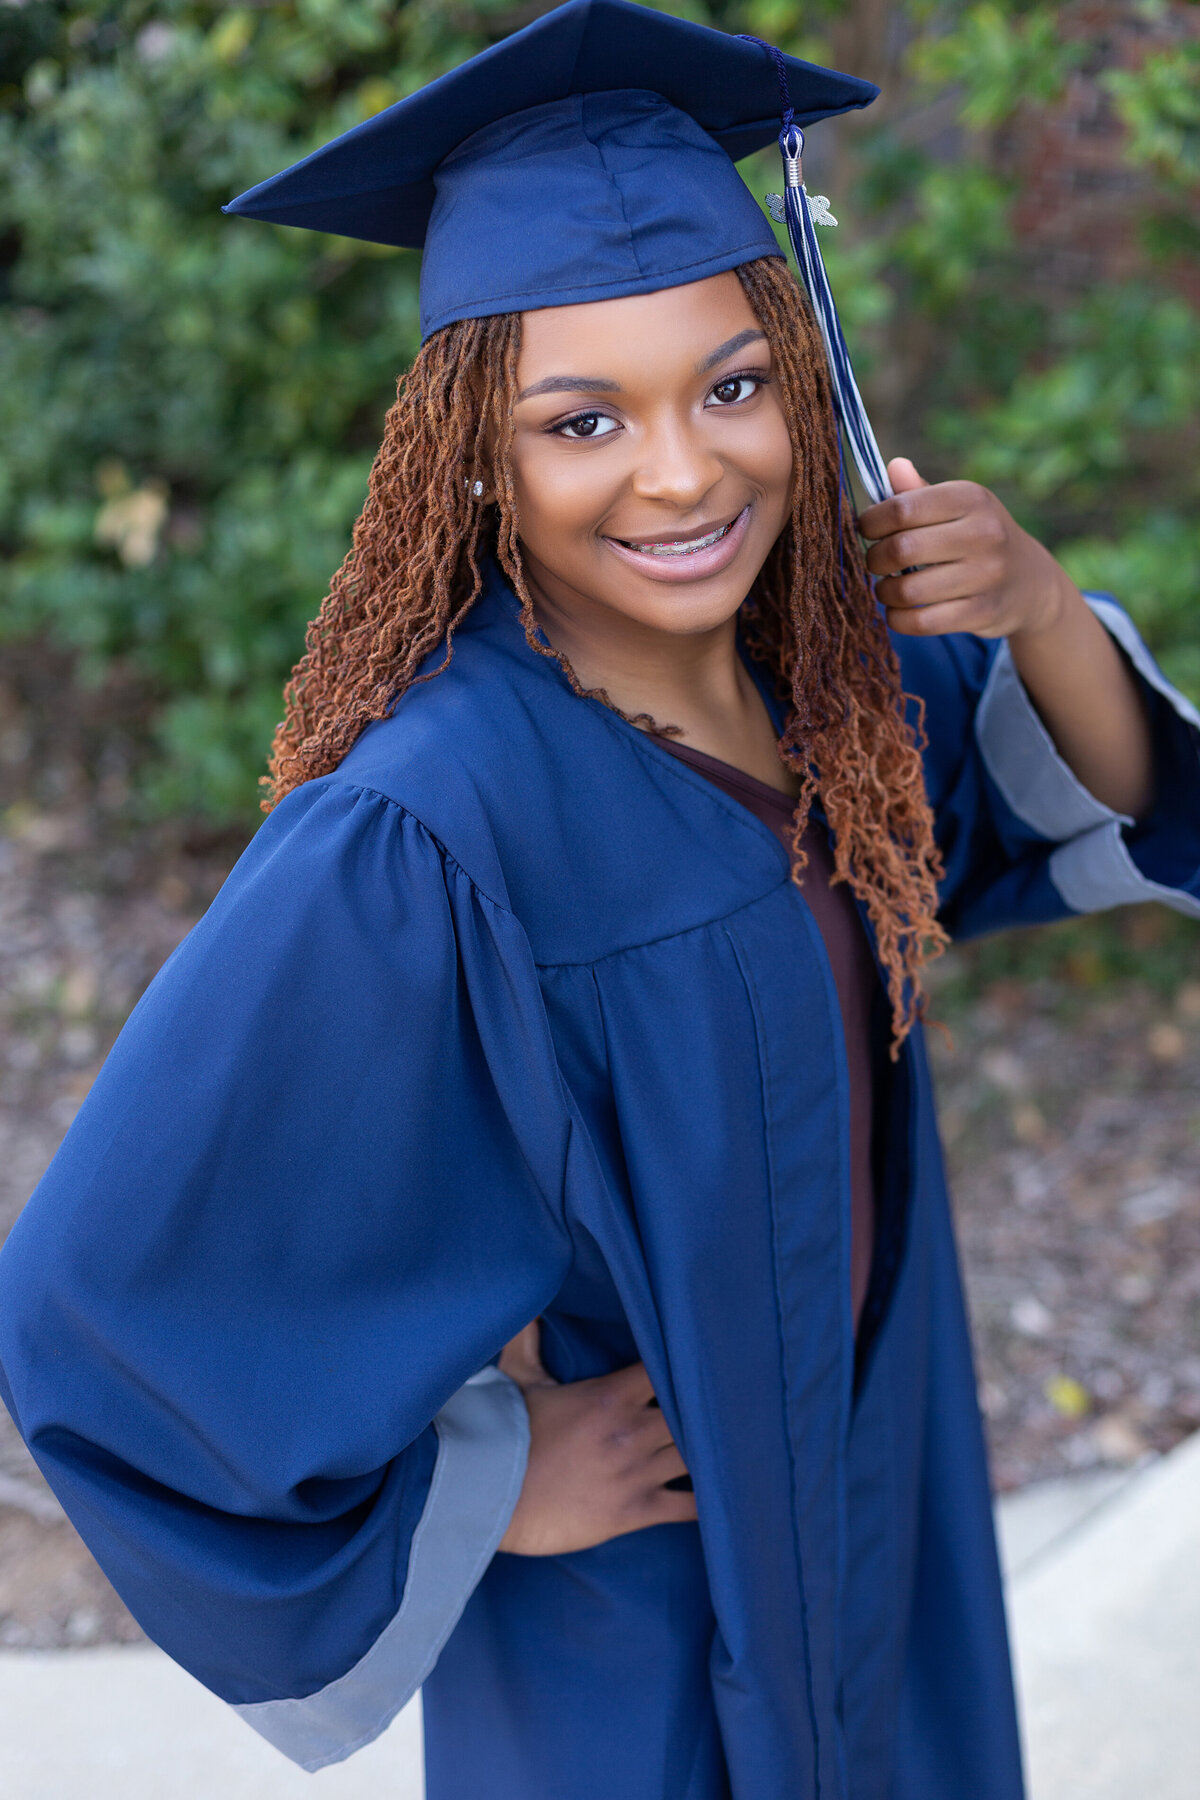 Clay Chalkville senior casually poses in her cap and gown in Birmingham, AL.